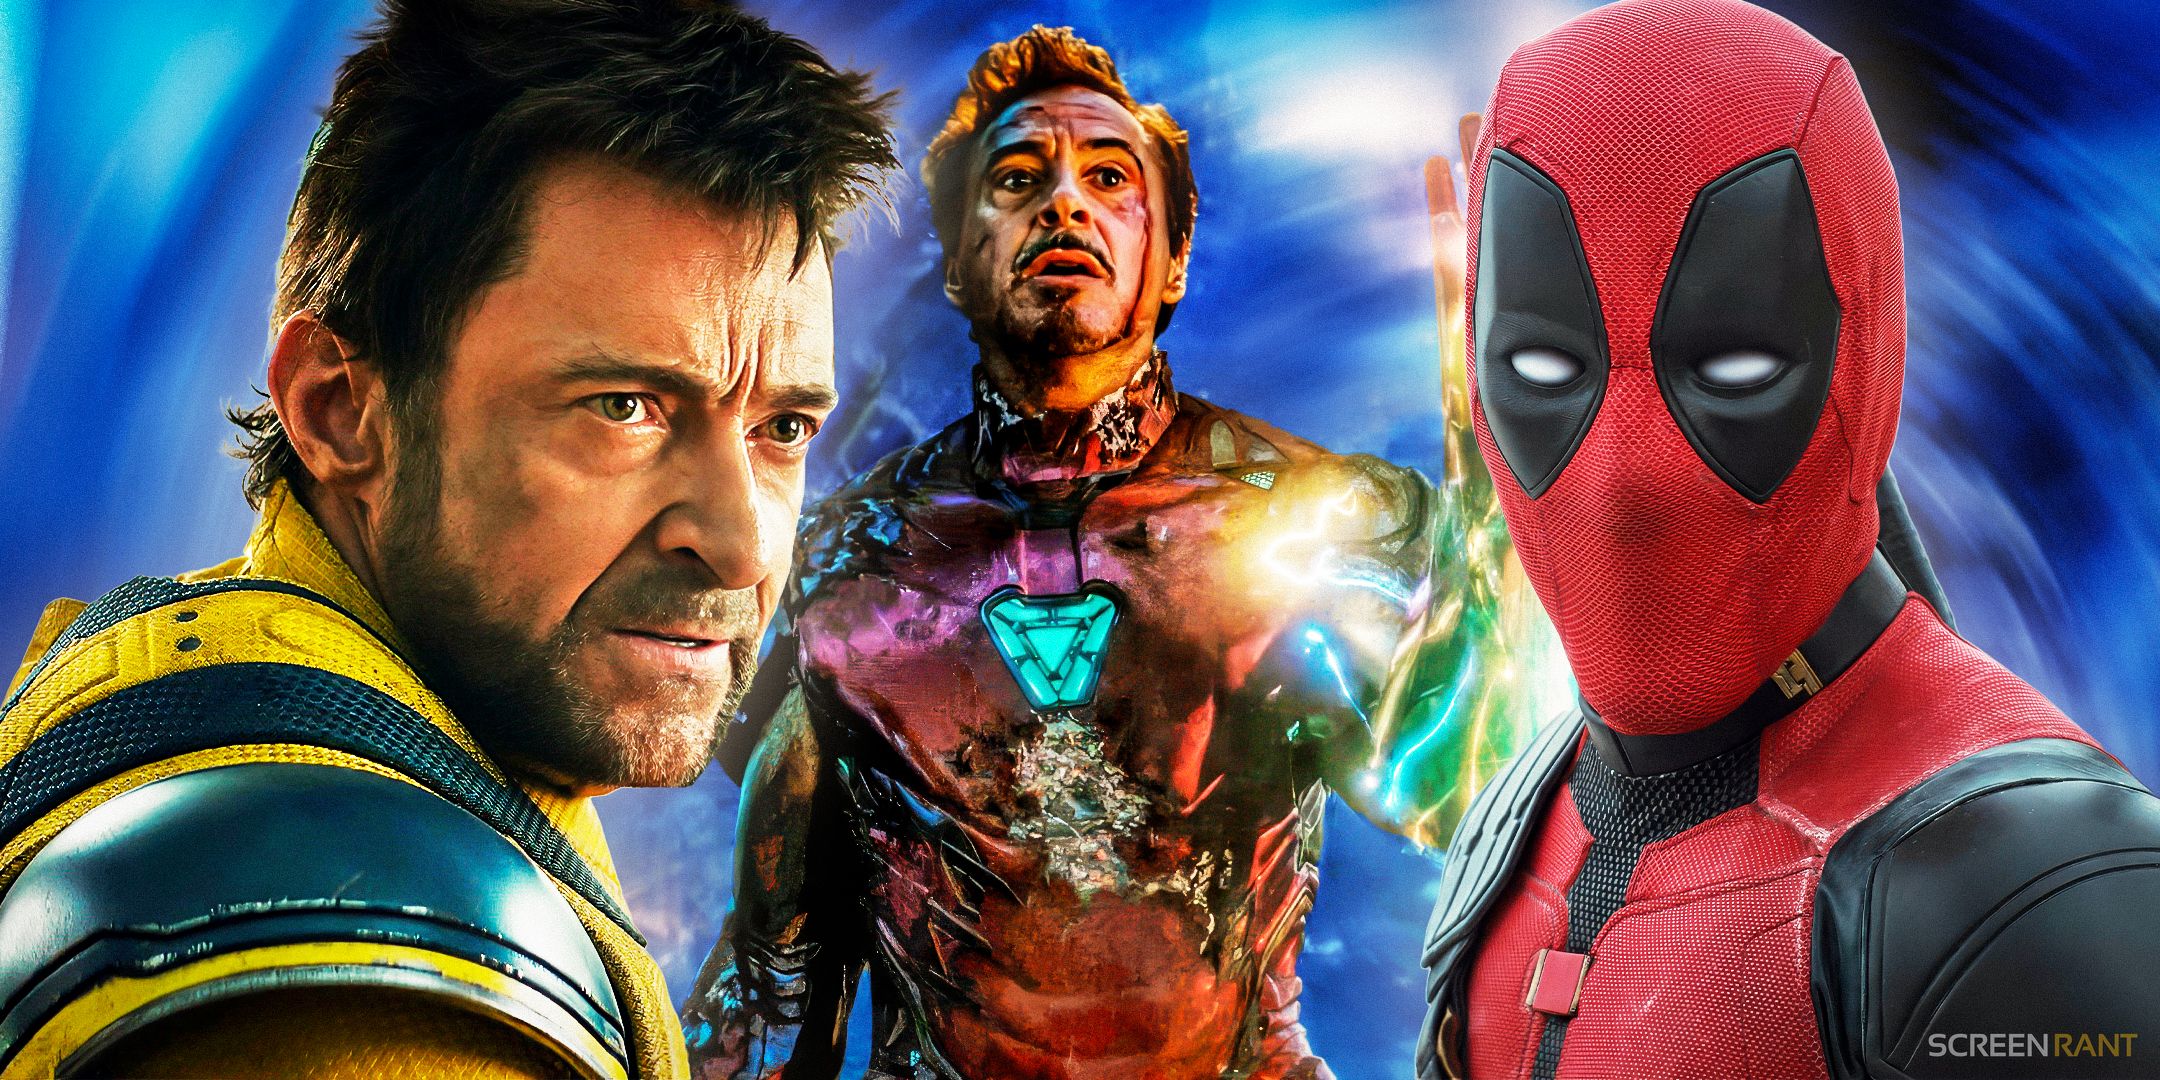 Deadpool & Wolverine Brings Iron Man Back From The Dead In Wild MCU Theory